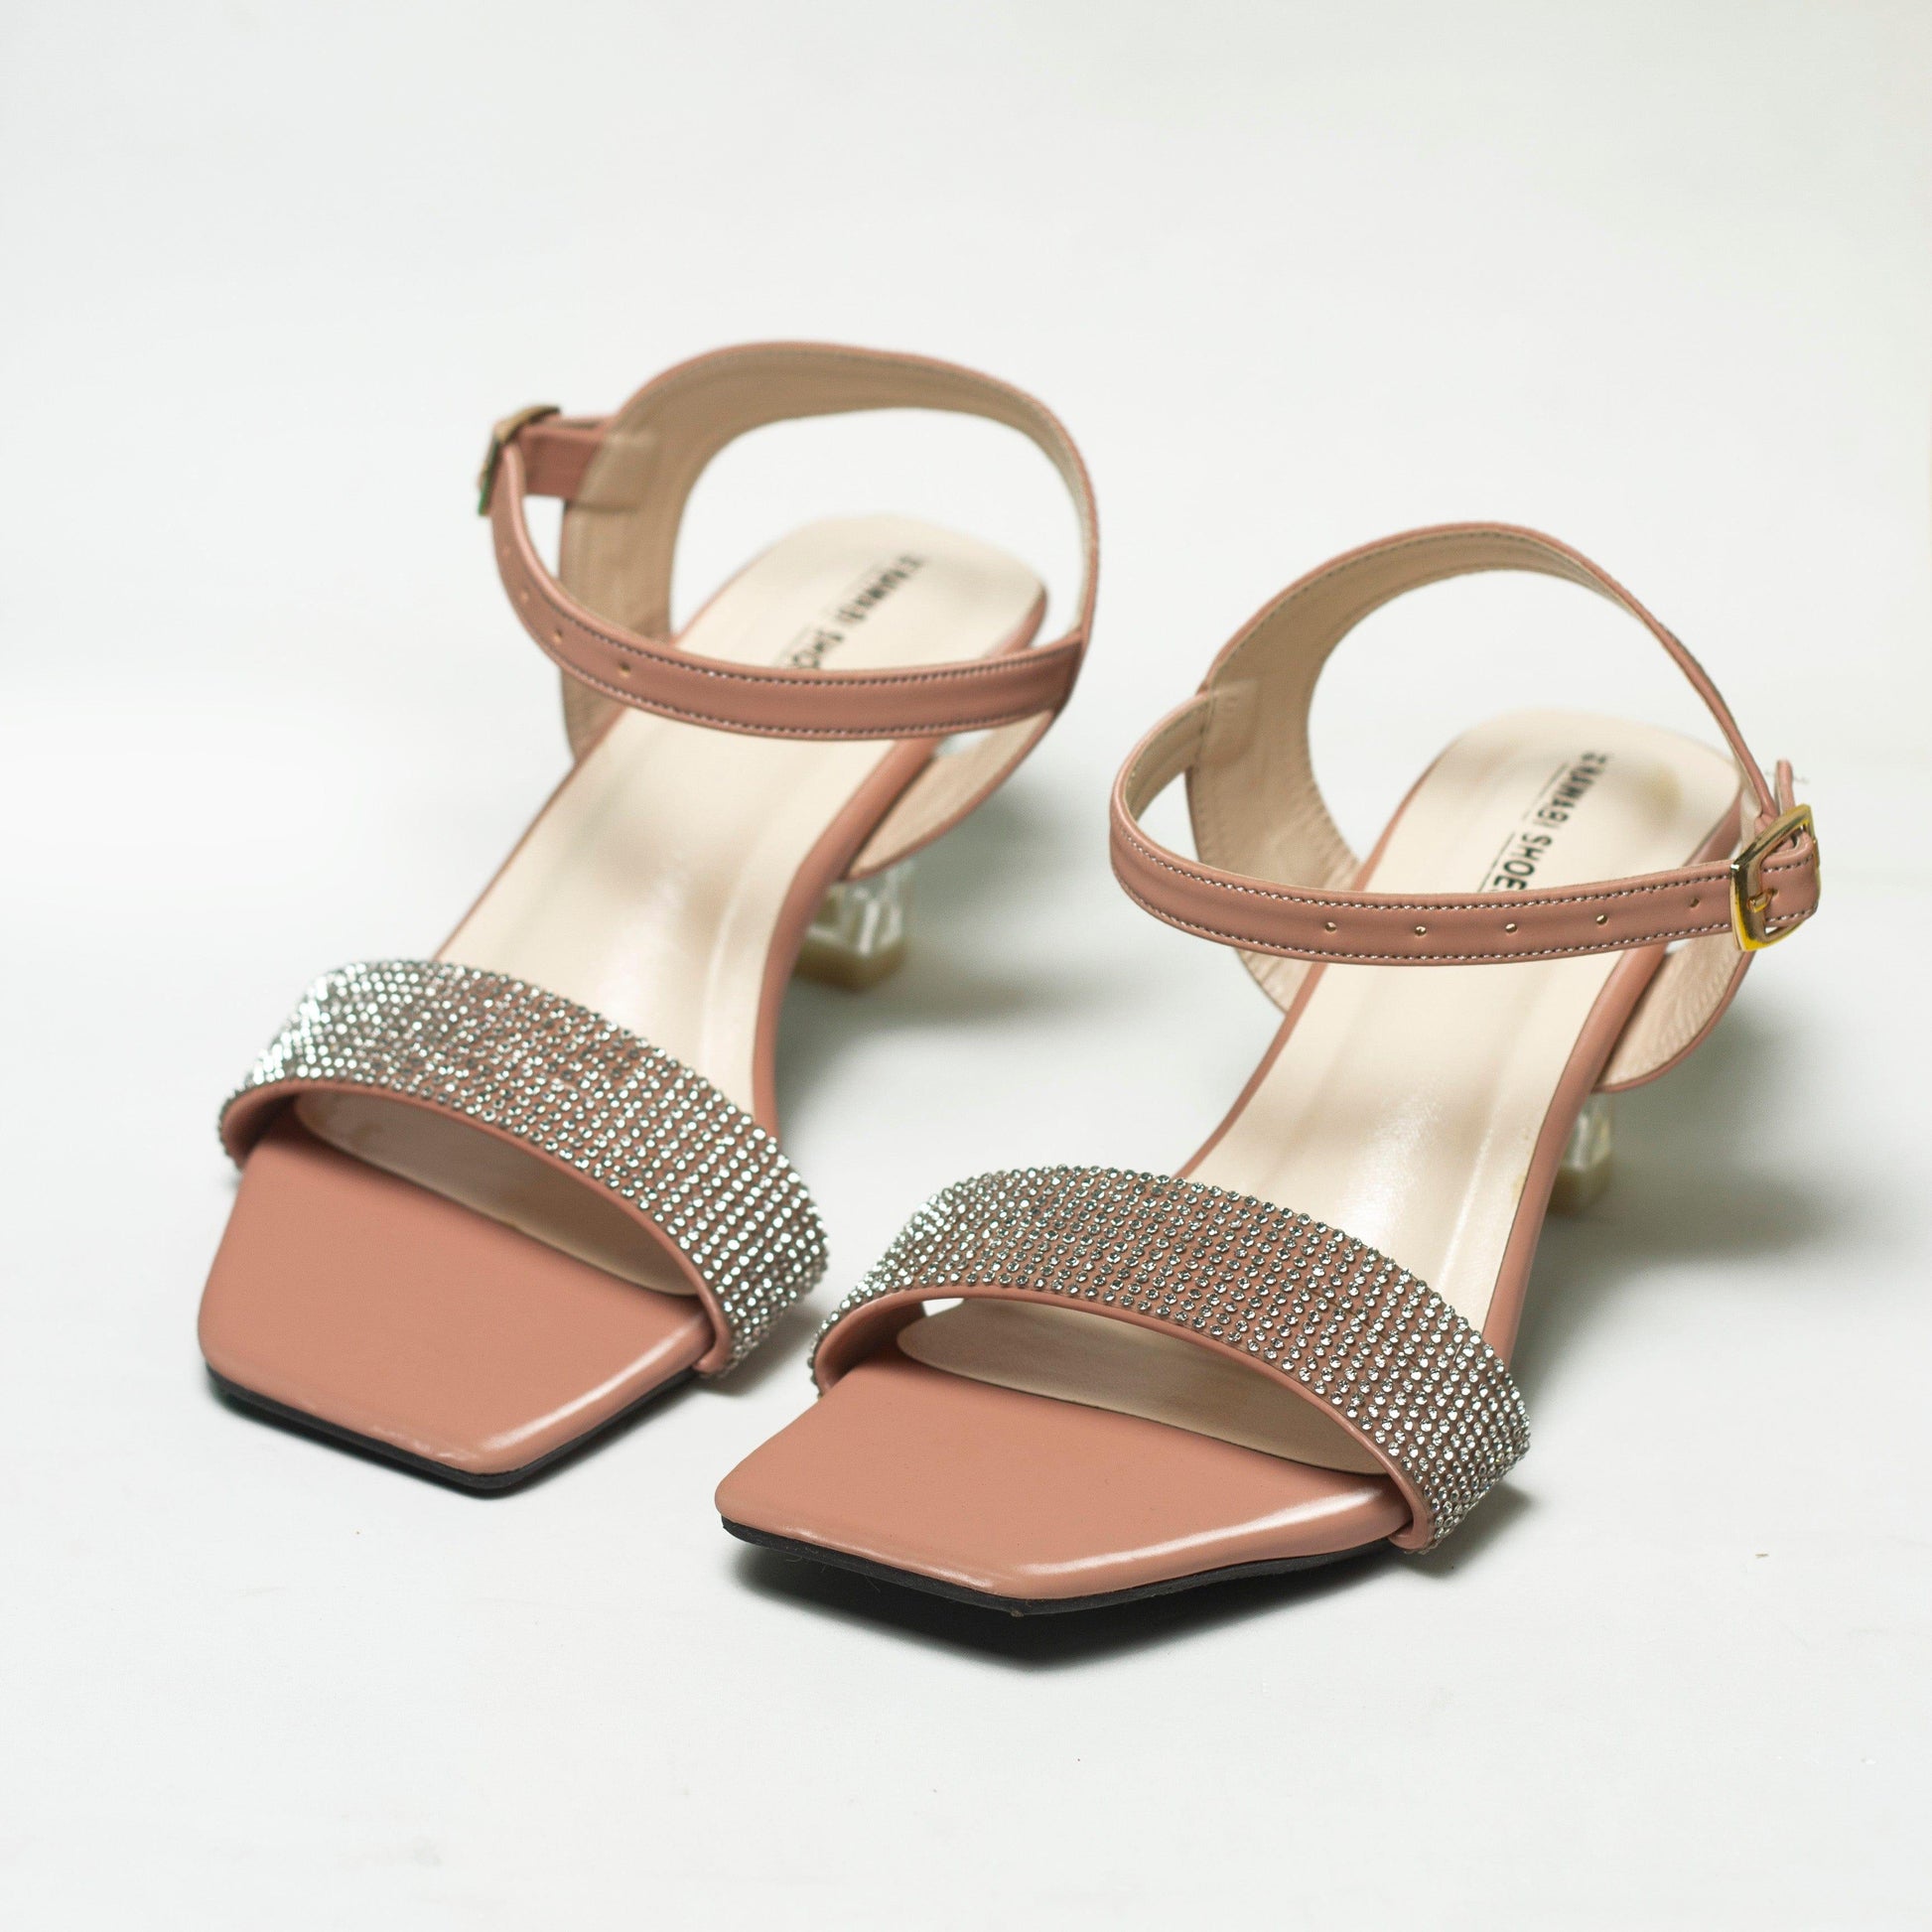 Nawabi Shoes BD Shoes 35 / darksalmon Shop Our Collection of Fashion-Forward Clear Heel Shoes